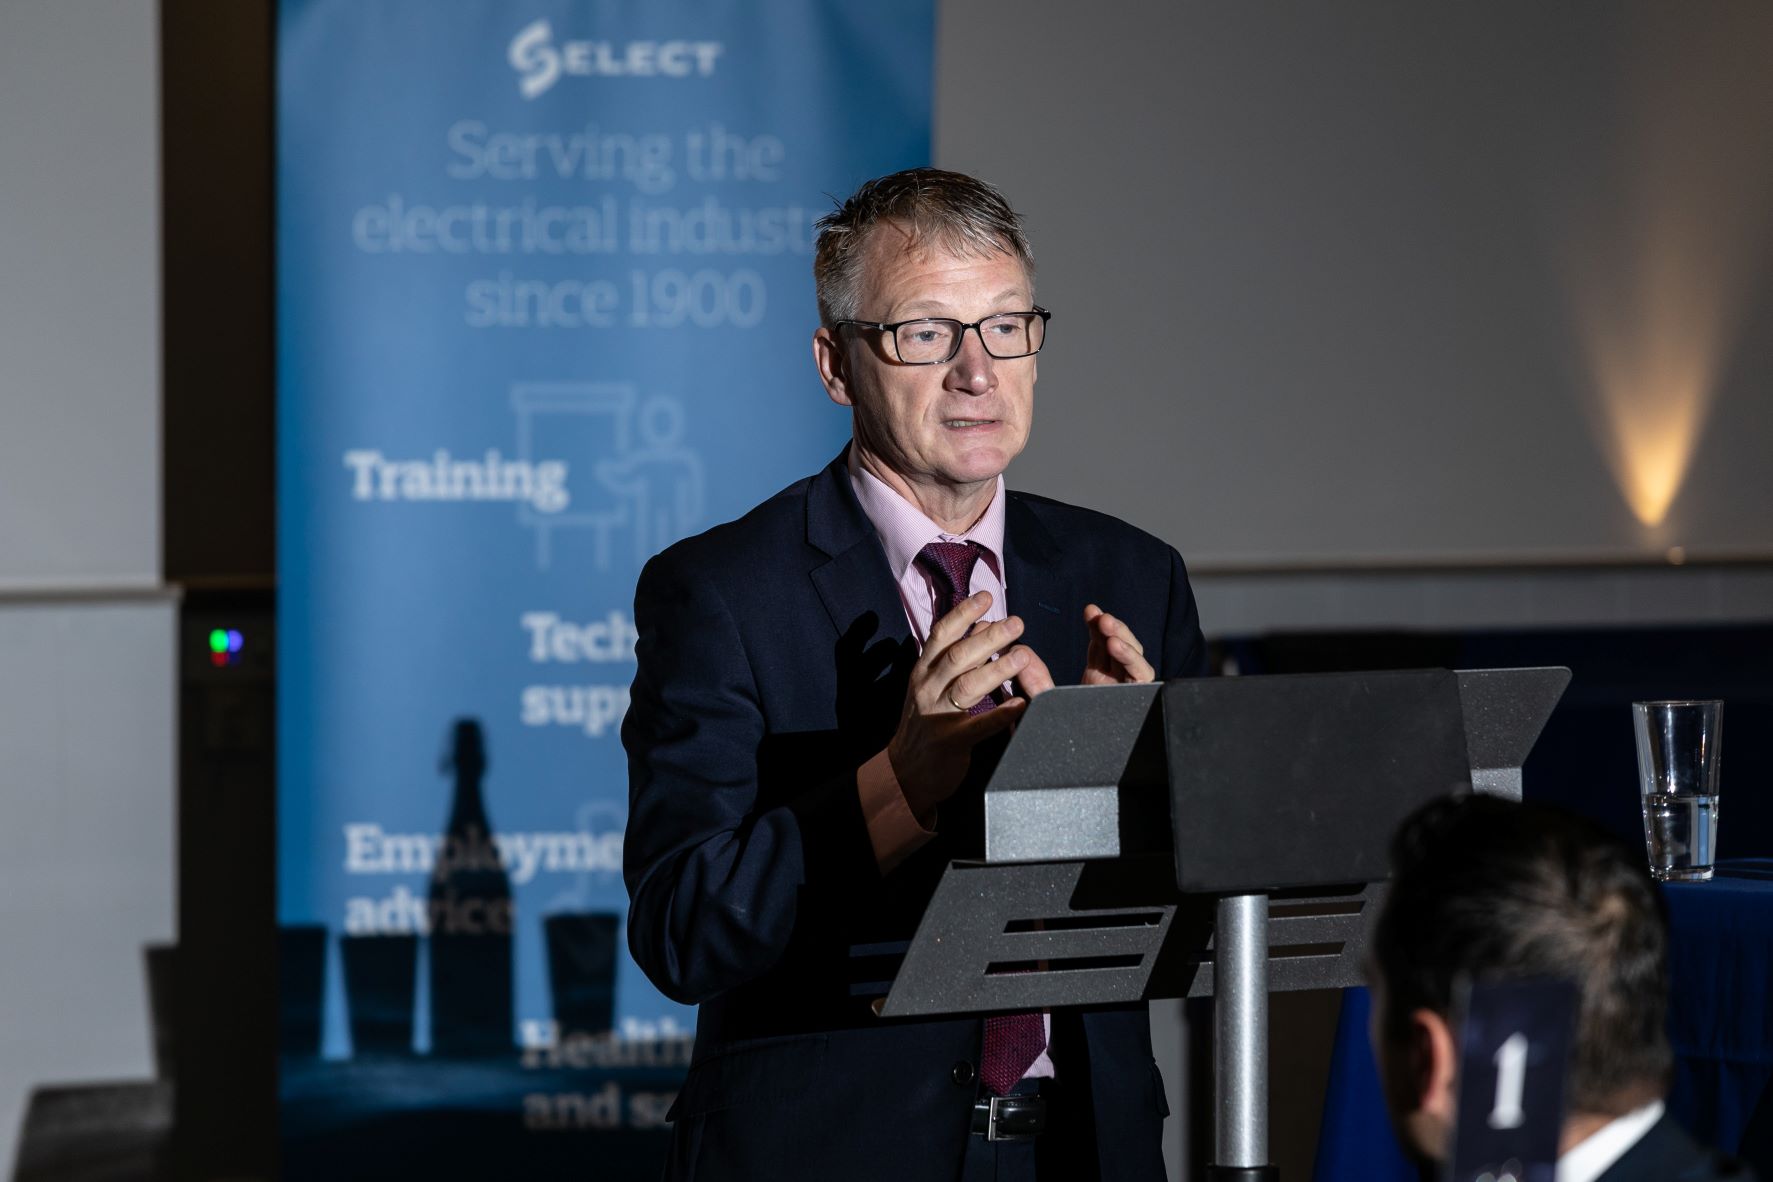 Minister Ivan McKee addresses industry leaders at SELECT President’s Lunch